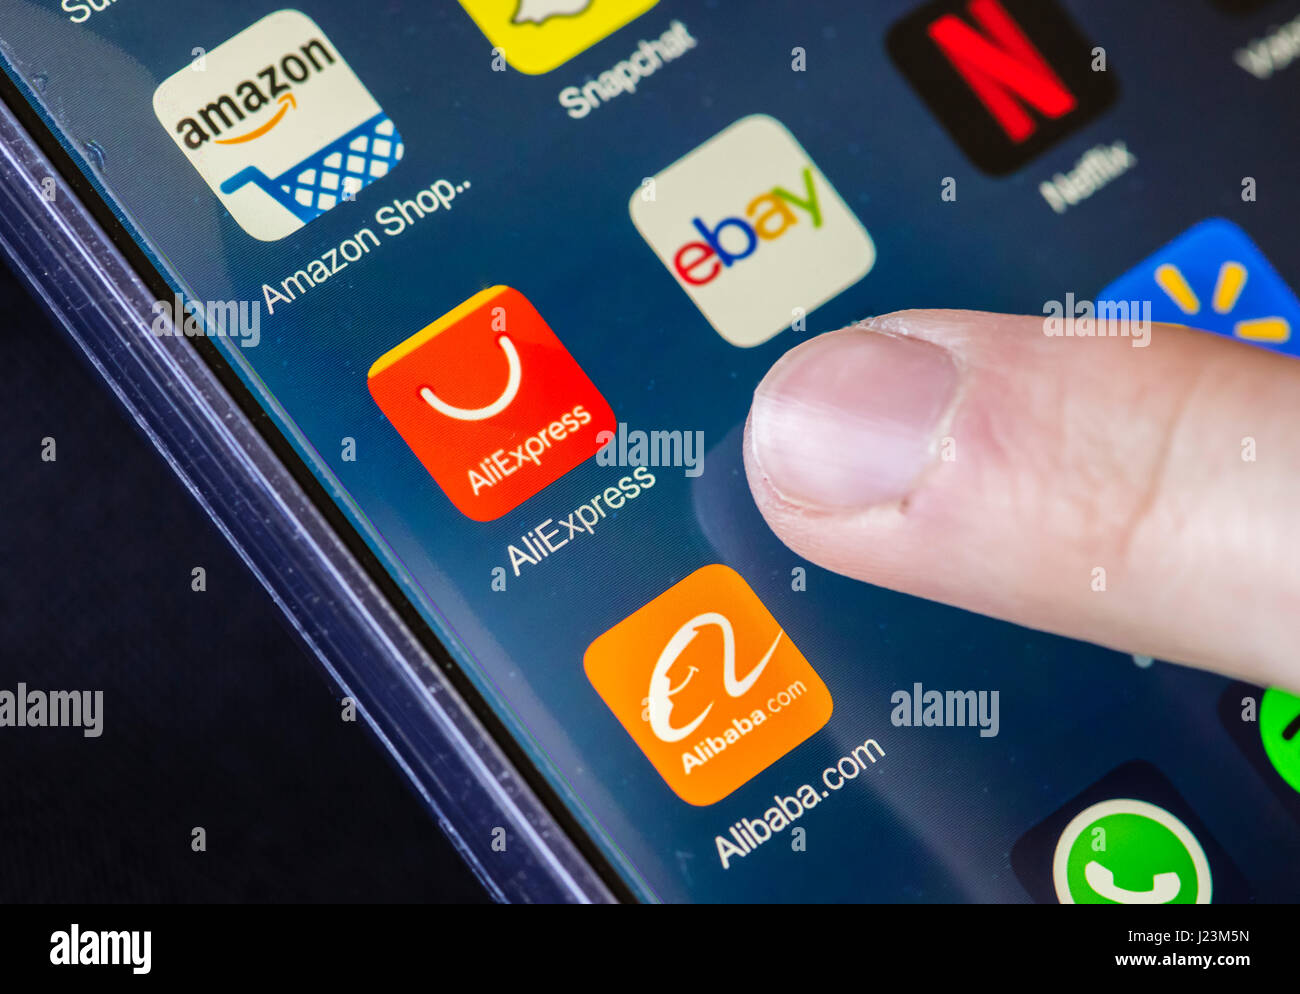 Zurich, Switzerland - 19 February 2017: The icons of AliExpress, Alibaba.com, Ebay and Amazon online shopping apps on a smartphone's touchscreen. Stock Photo